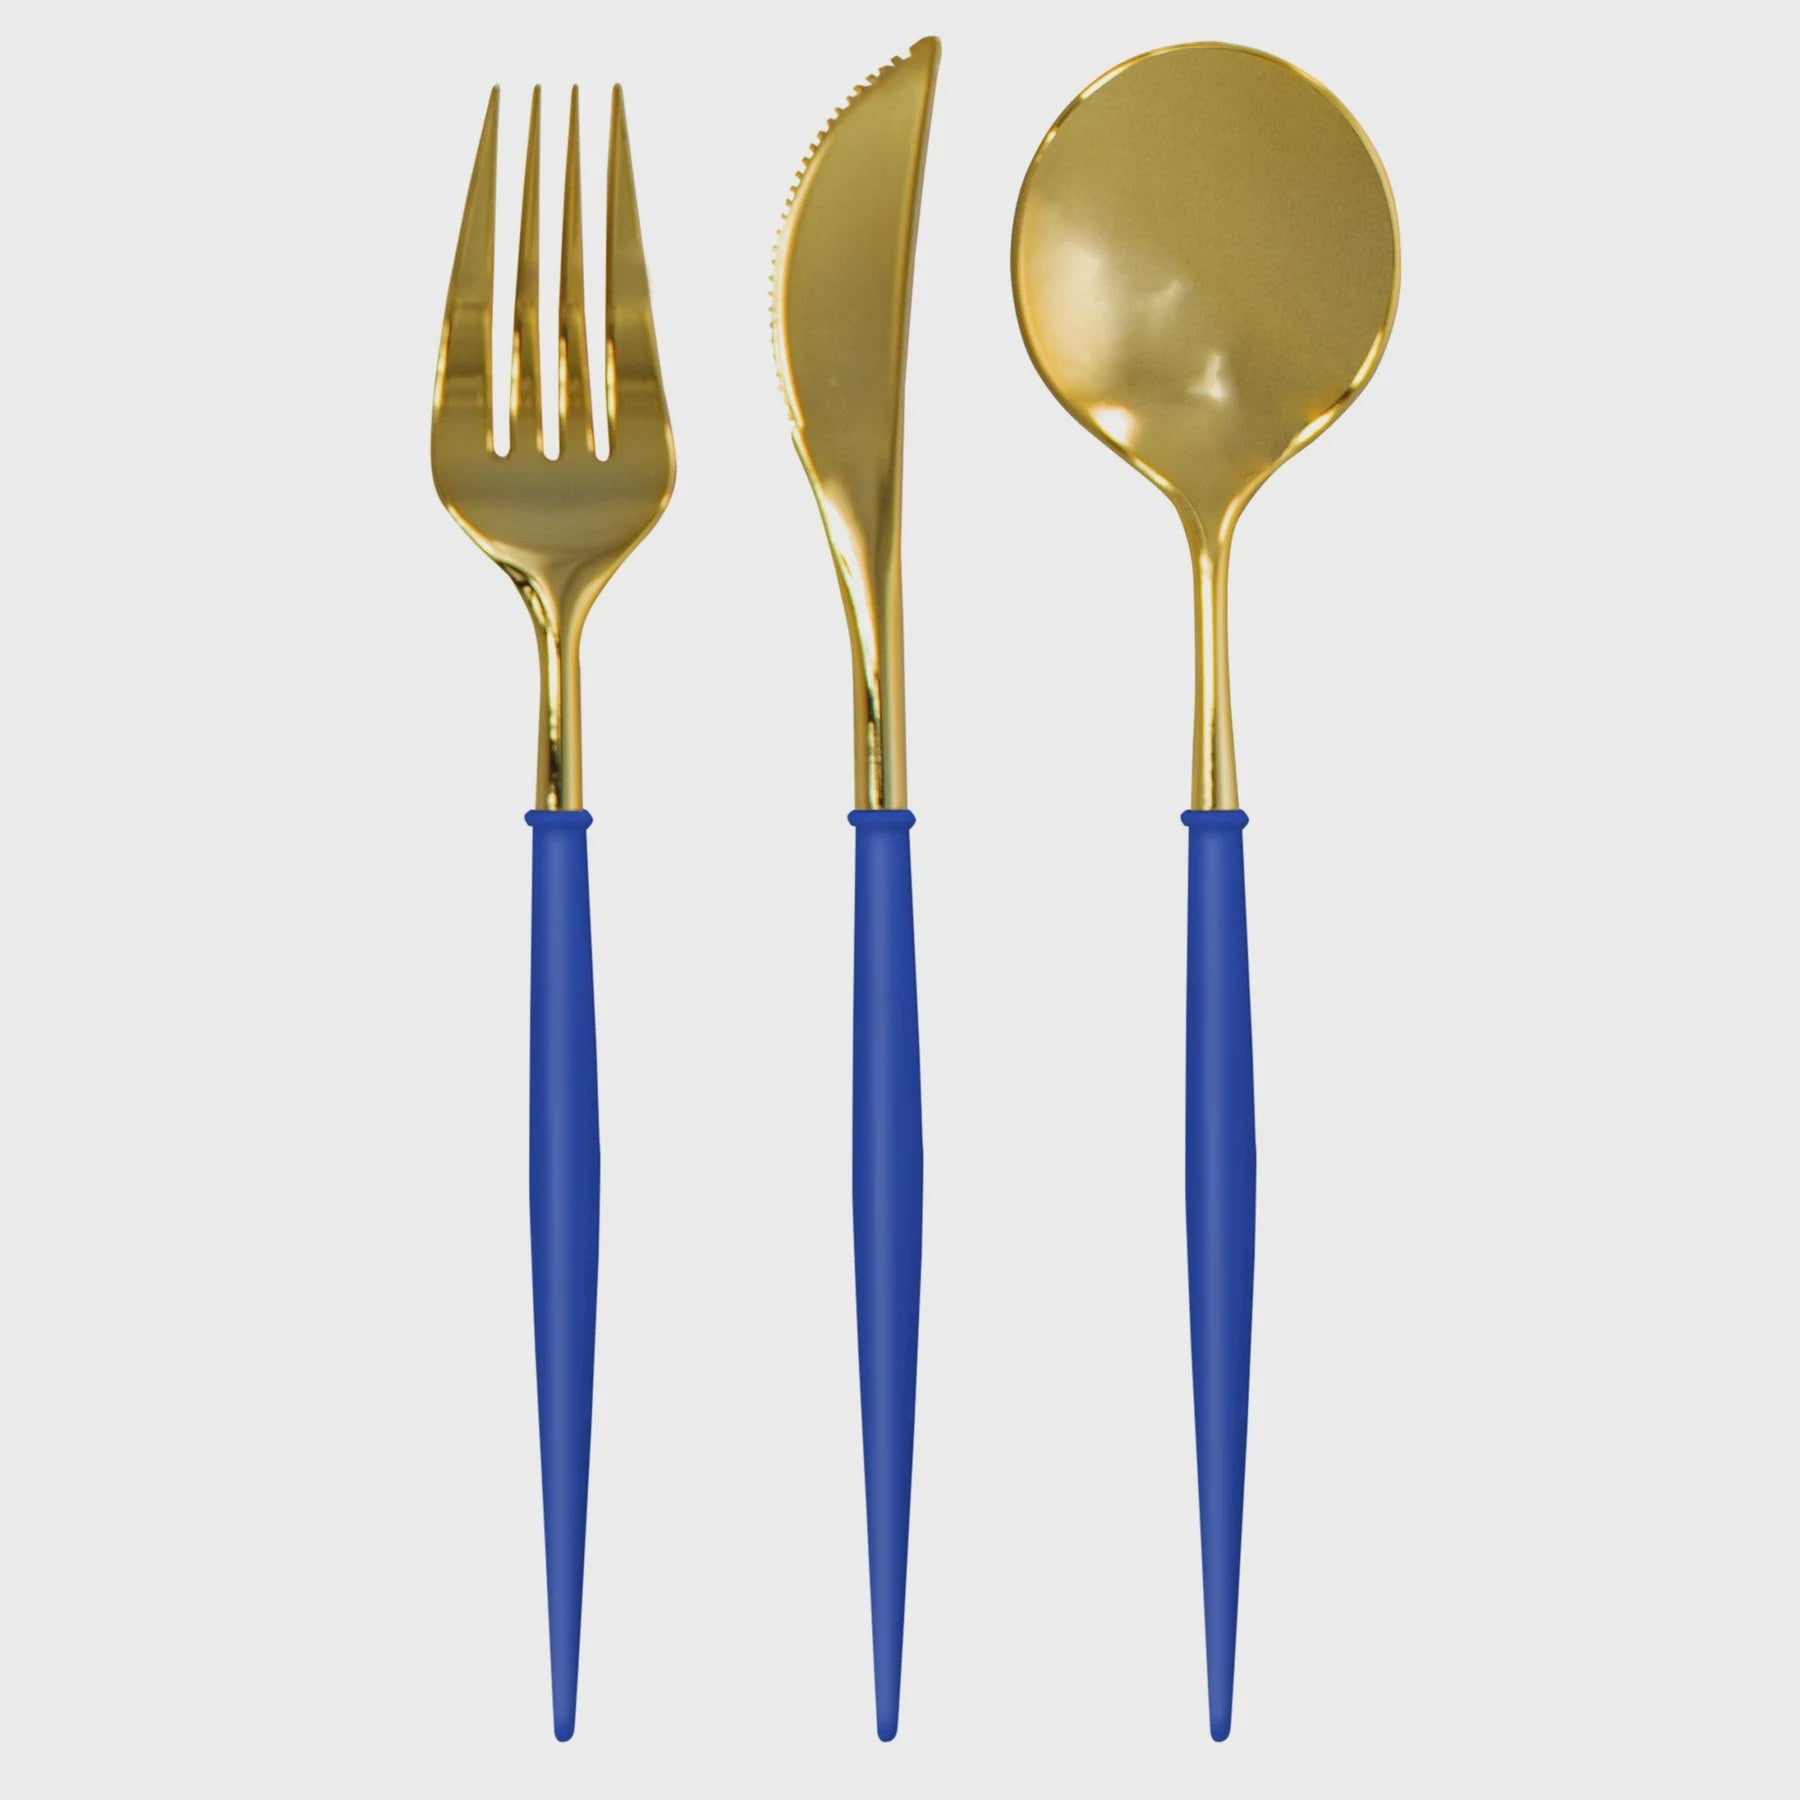 Bella Plastic Cutlery in Gold and Blue by Sophistiplate, featuring a spoon, fork, and knife with sleek modern design, perfect for elevating any table setting or event.